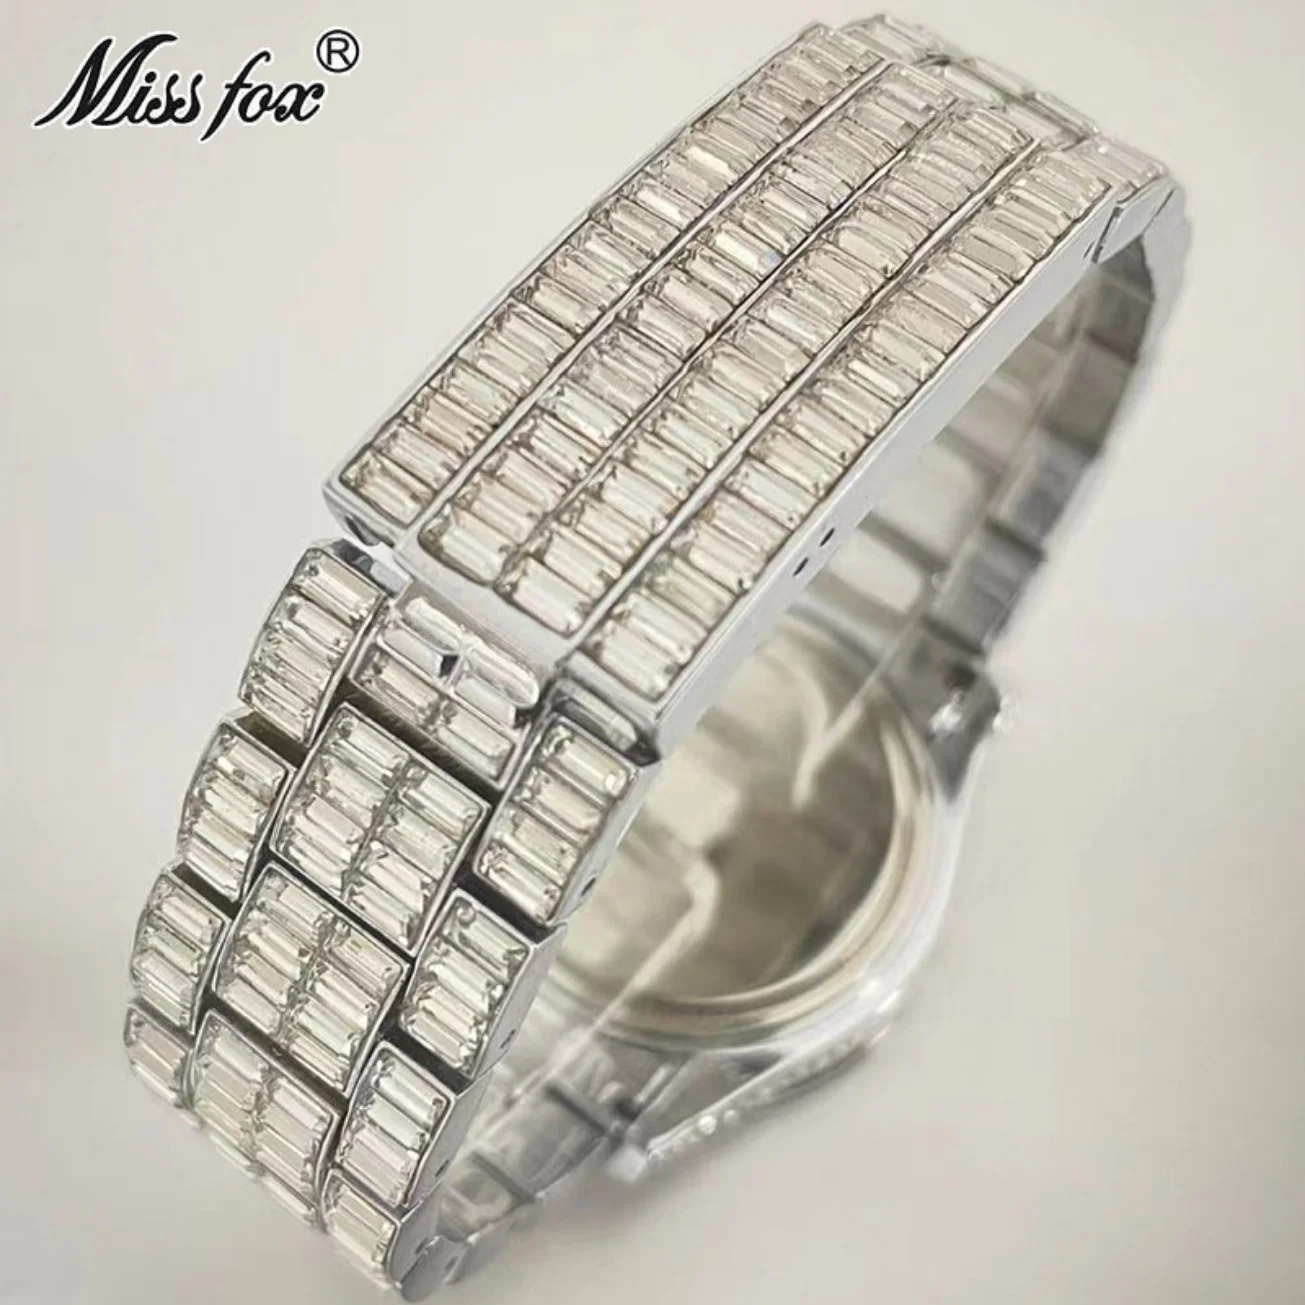 Iced Out Moissanite Men Jewelry Watch Tested AAA Luxury Watch For Men Brand Chronograph Rainbow Diamond Mossanite Jewelry Gift enlarge